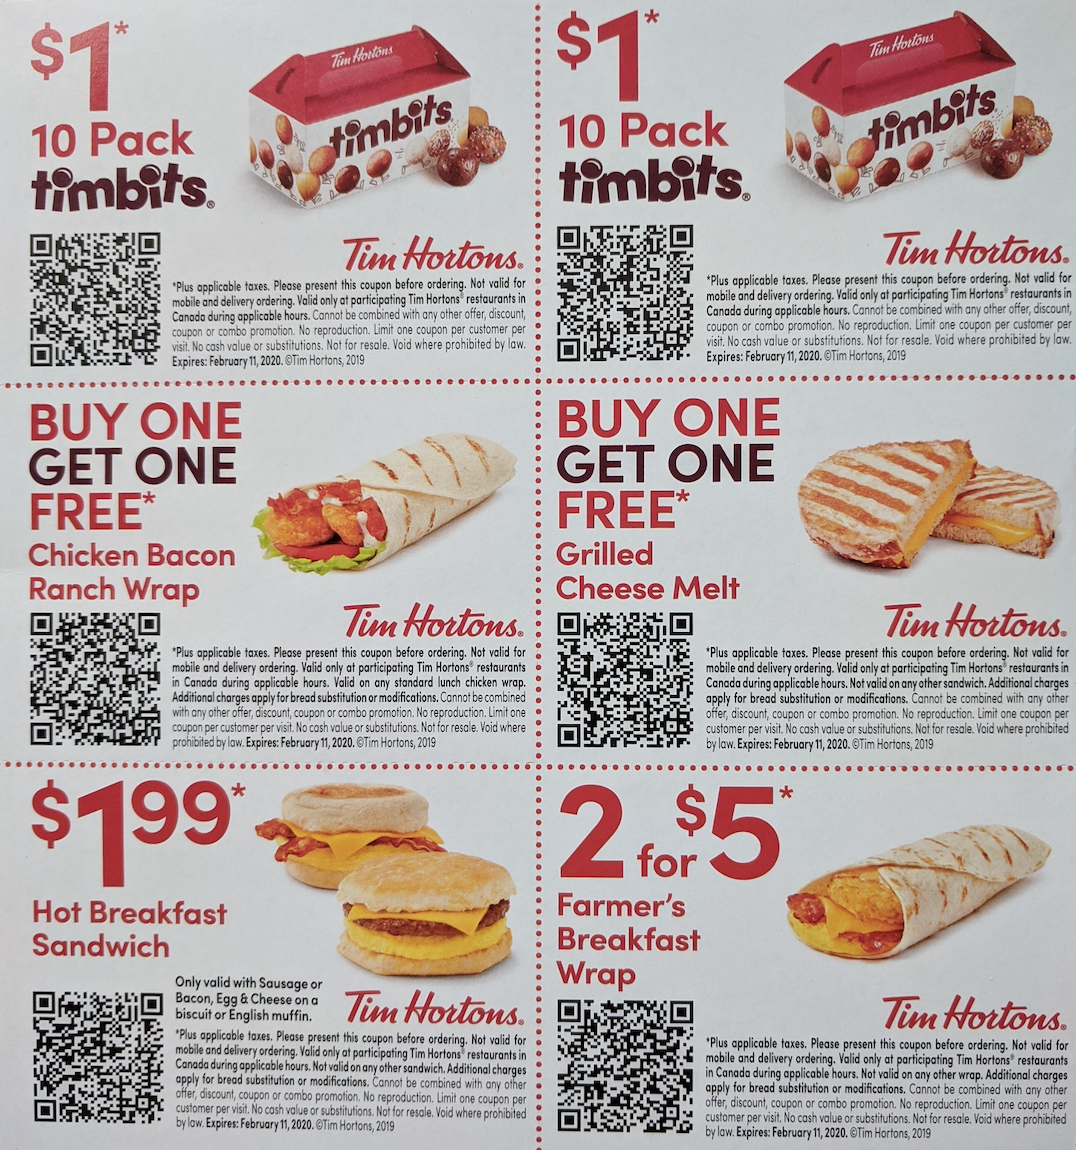 tim-hortons-canada-new-coupons-10-pack-timbits-for-1-buy-one-get